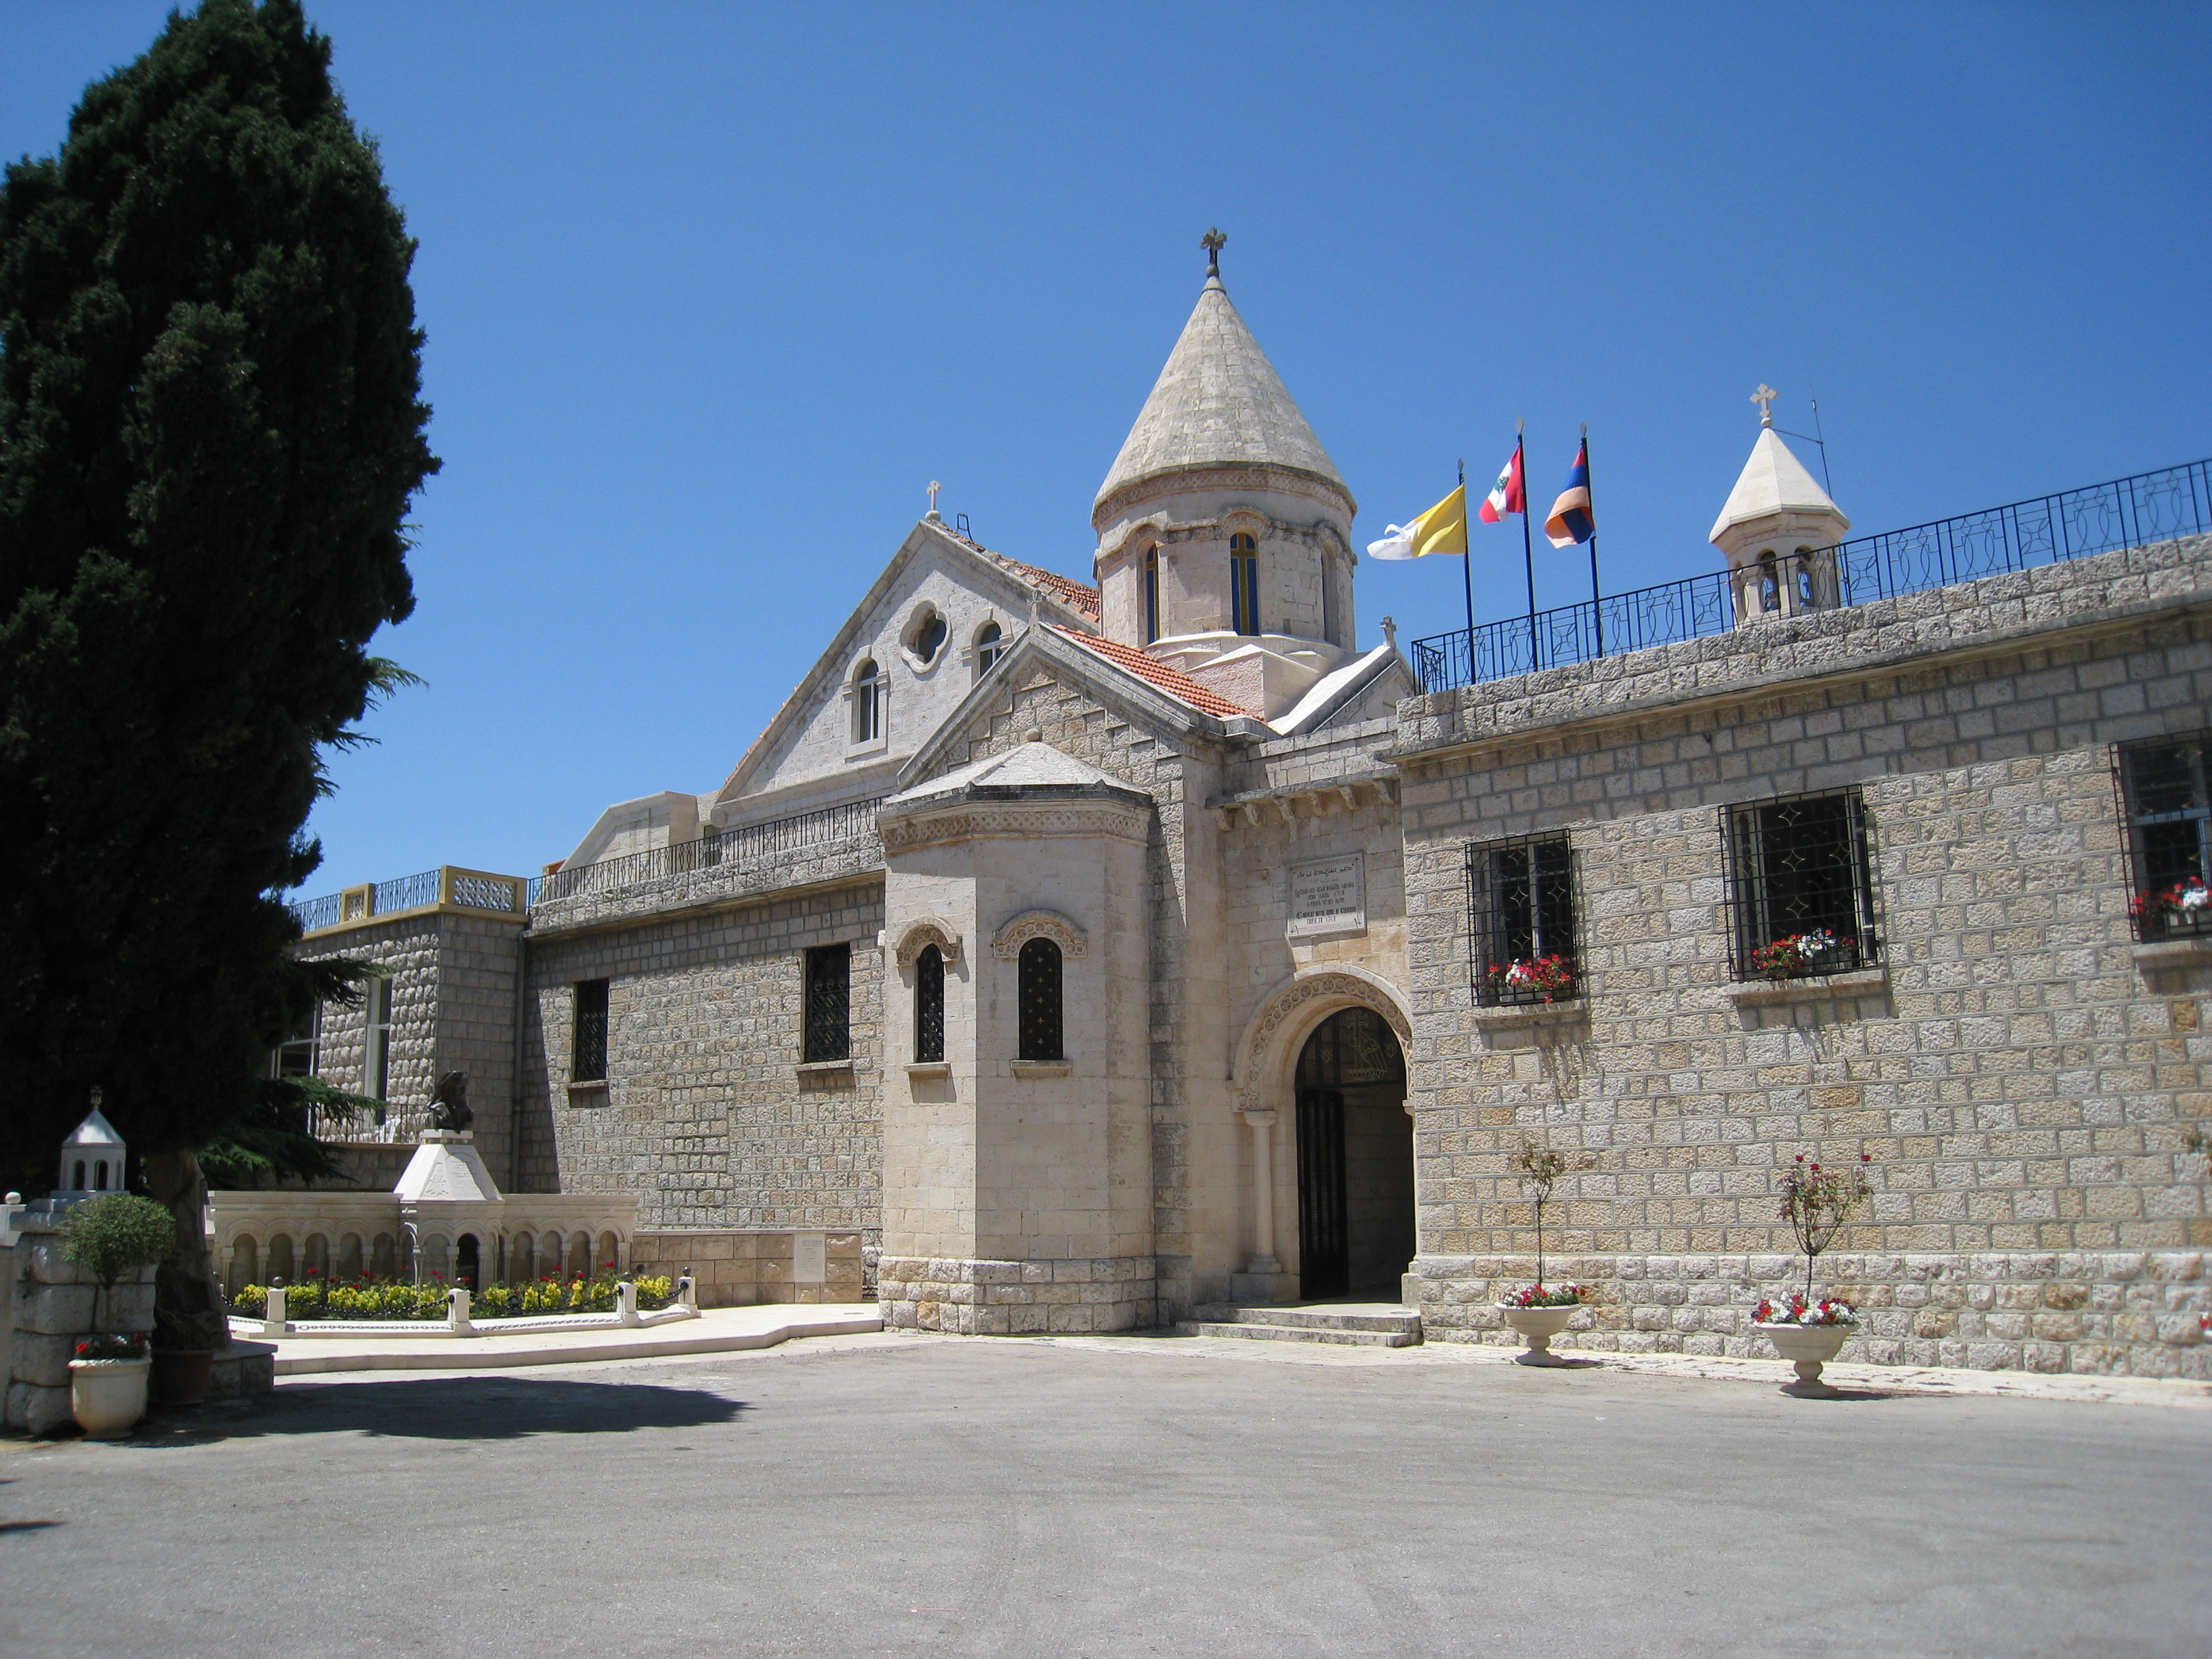 The building of the Armenian Catholic Patriarchate in Bzommar, Lebanon, flying the flags of the Vatican, Lebanon, and Armenia